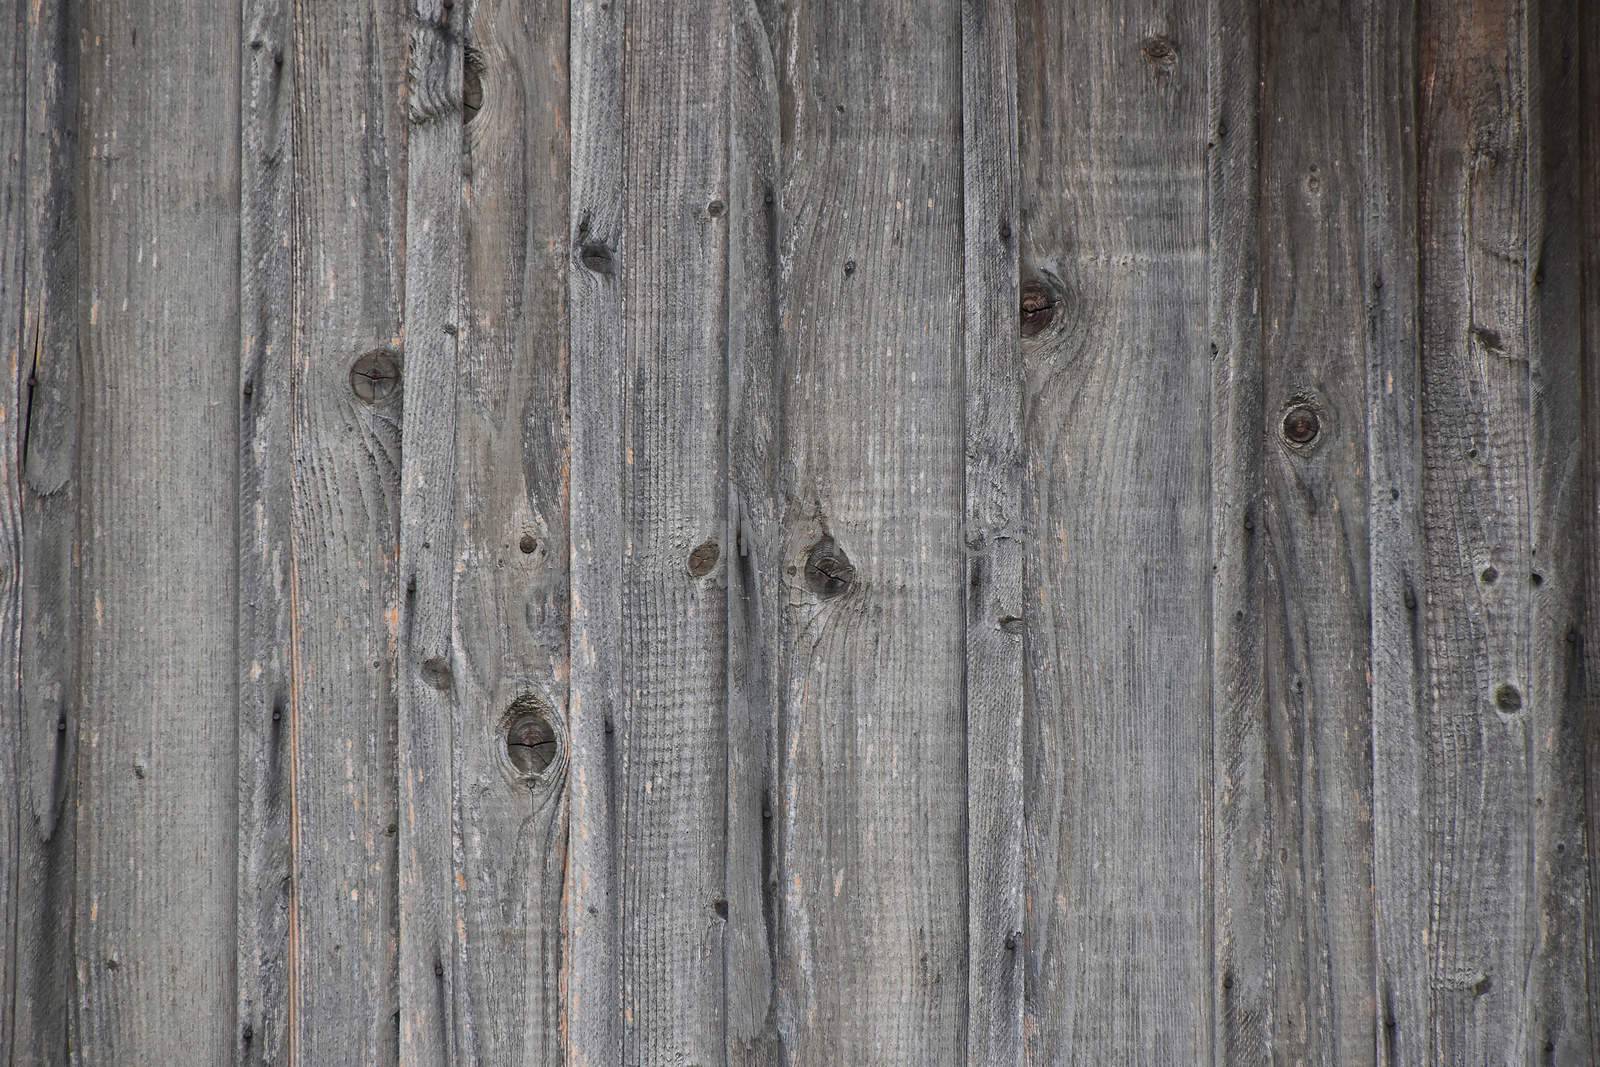 Vintage wooden fence with vertical planks and gaps by BreakingTheWalls